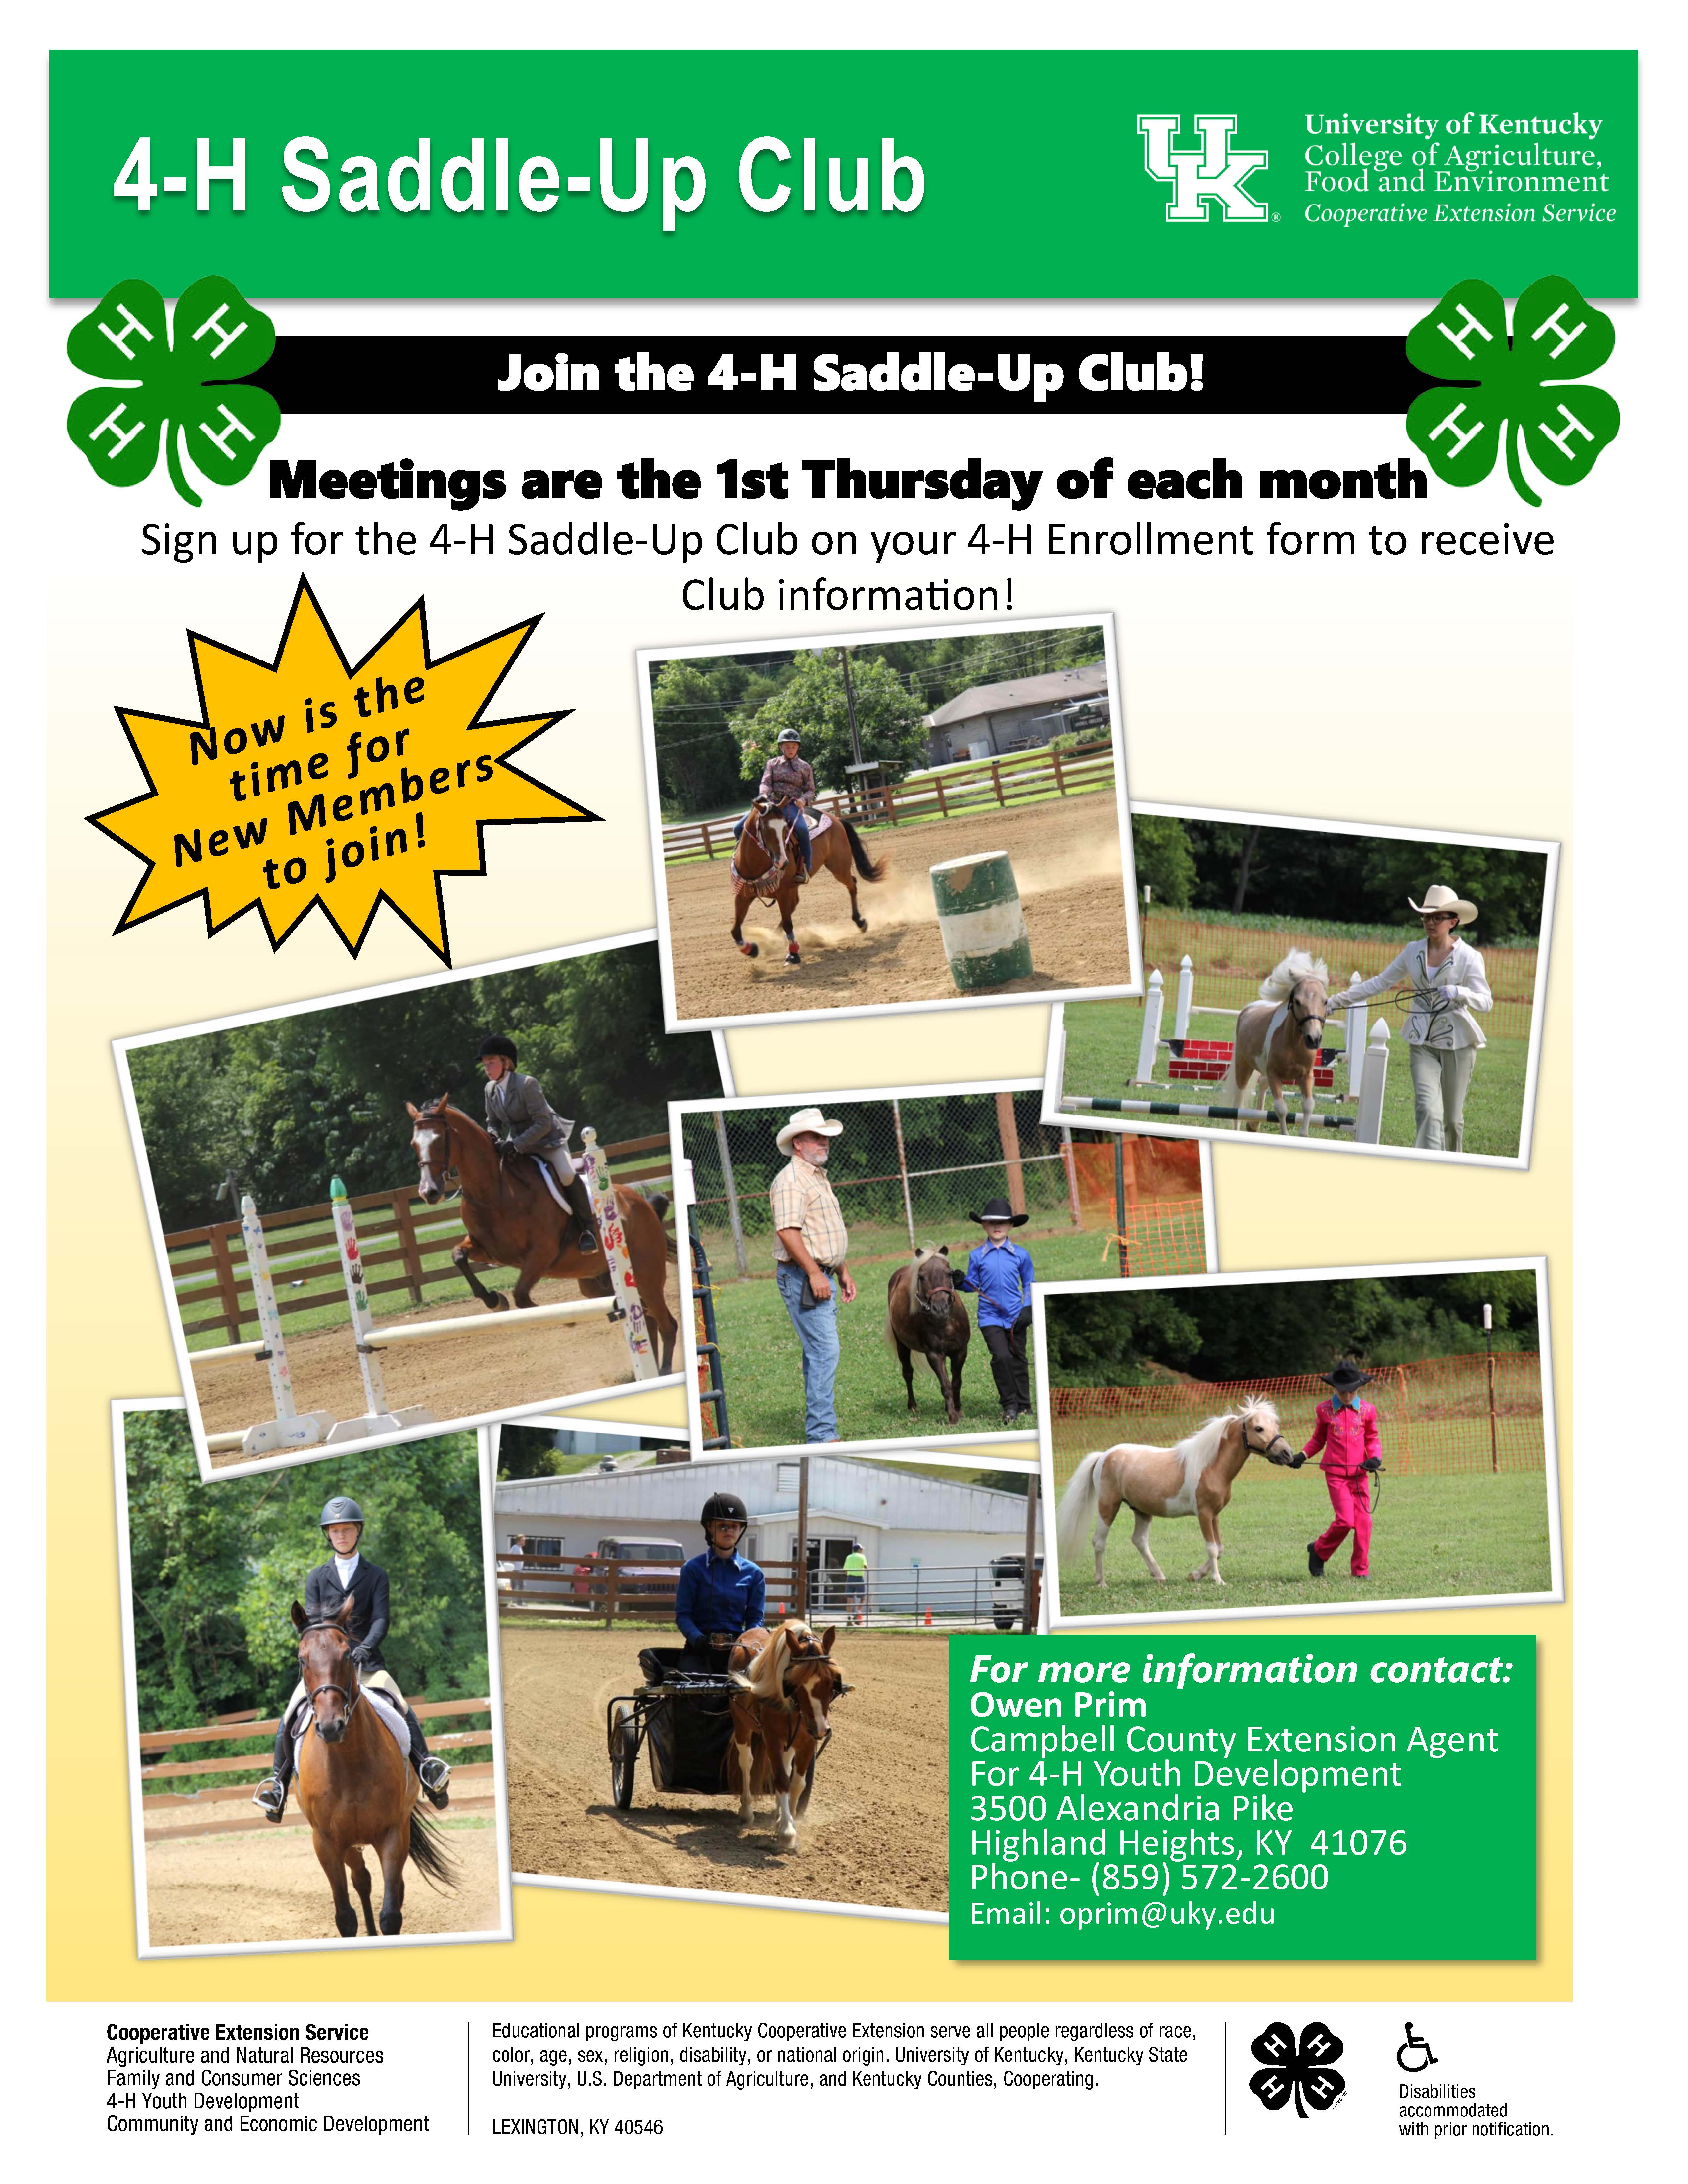 The 4-H Saddle-Up Club meets the first Thursday of each month. Be sure to sign up for this club on your 4-H Enrollment form to receive club information and updates.